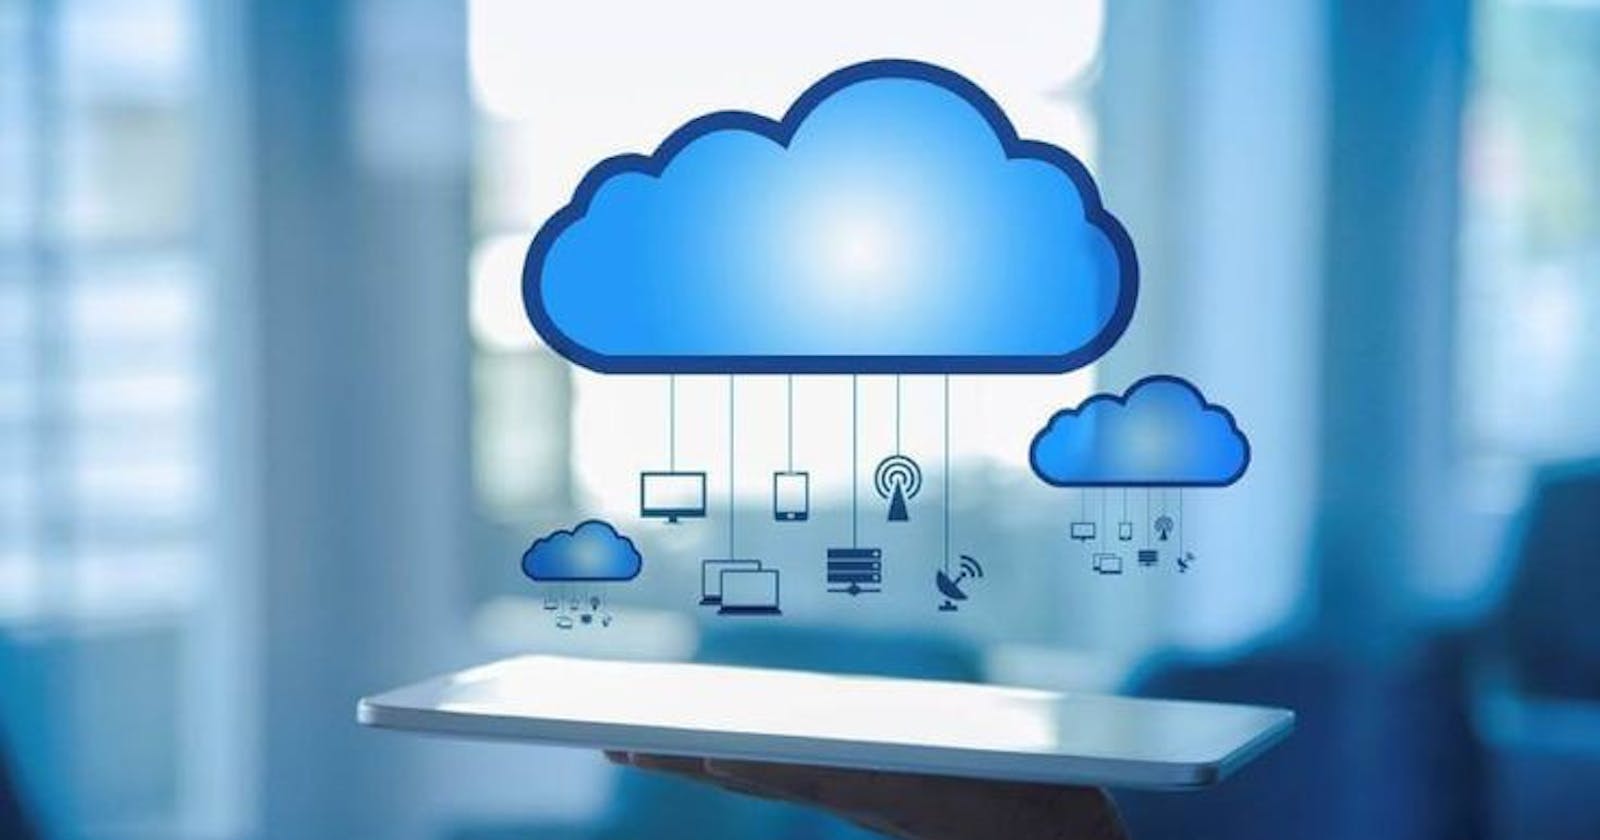 Terminologies you should be familiar with before starting a cloud journey